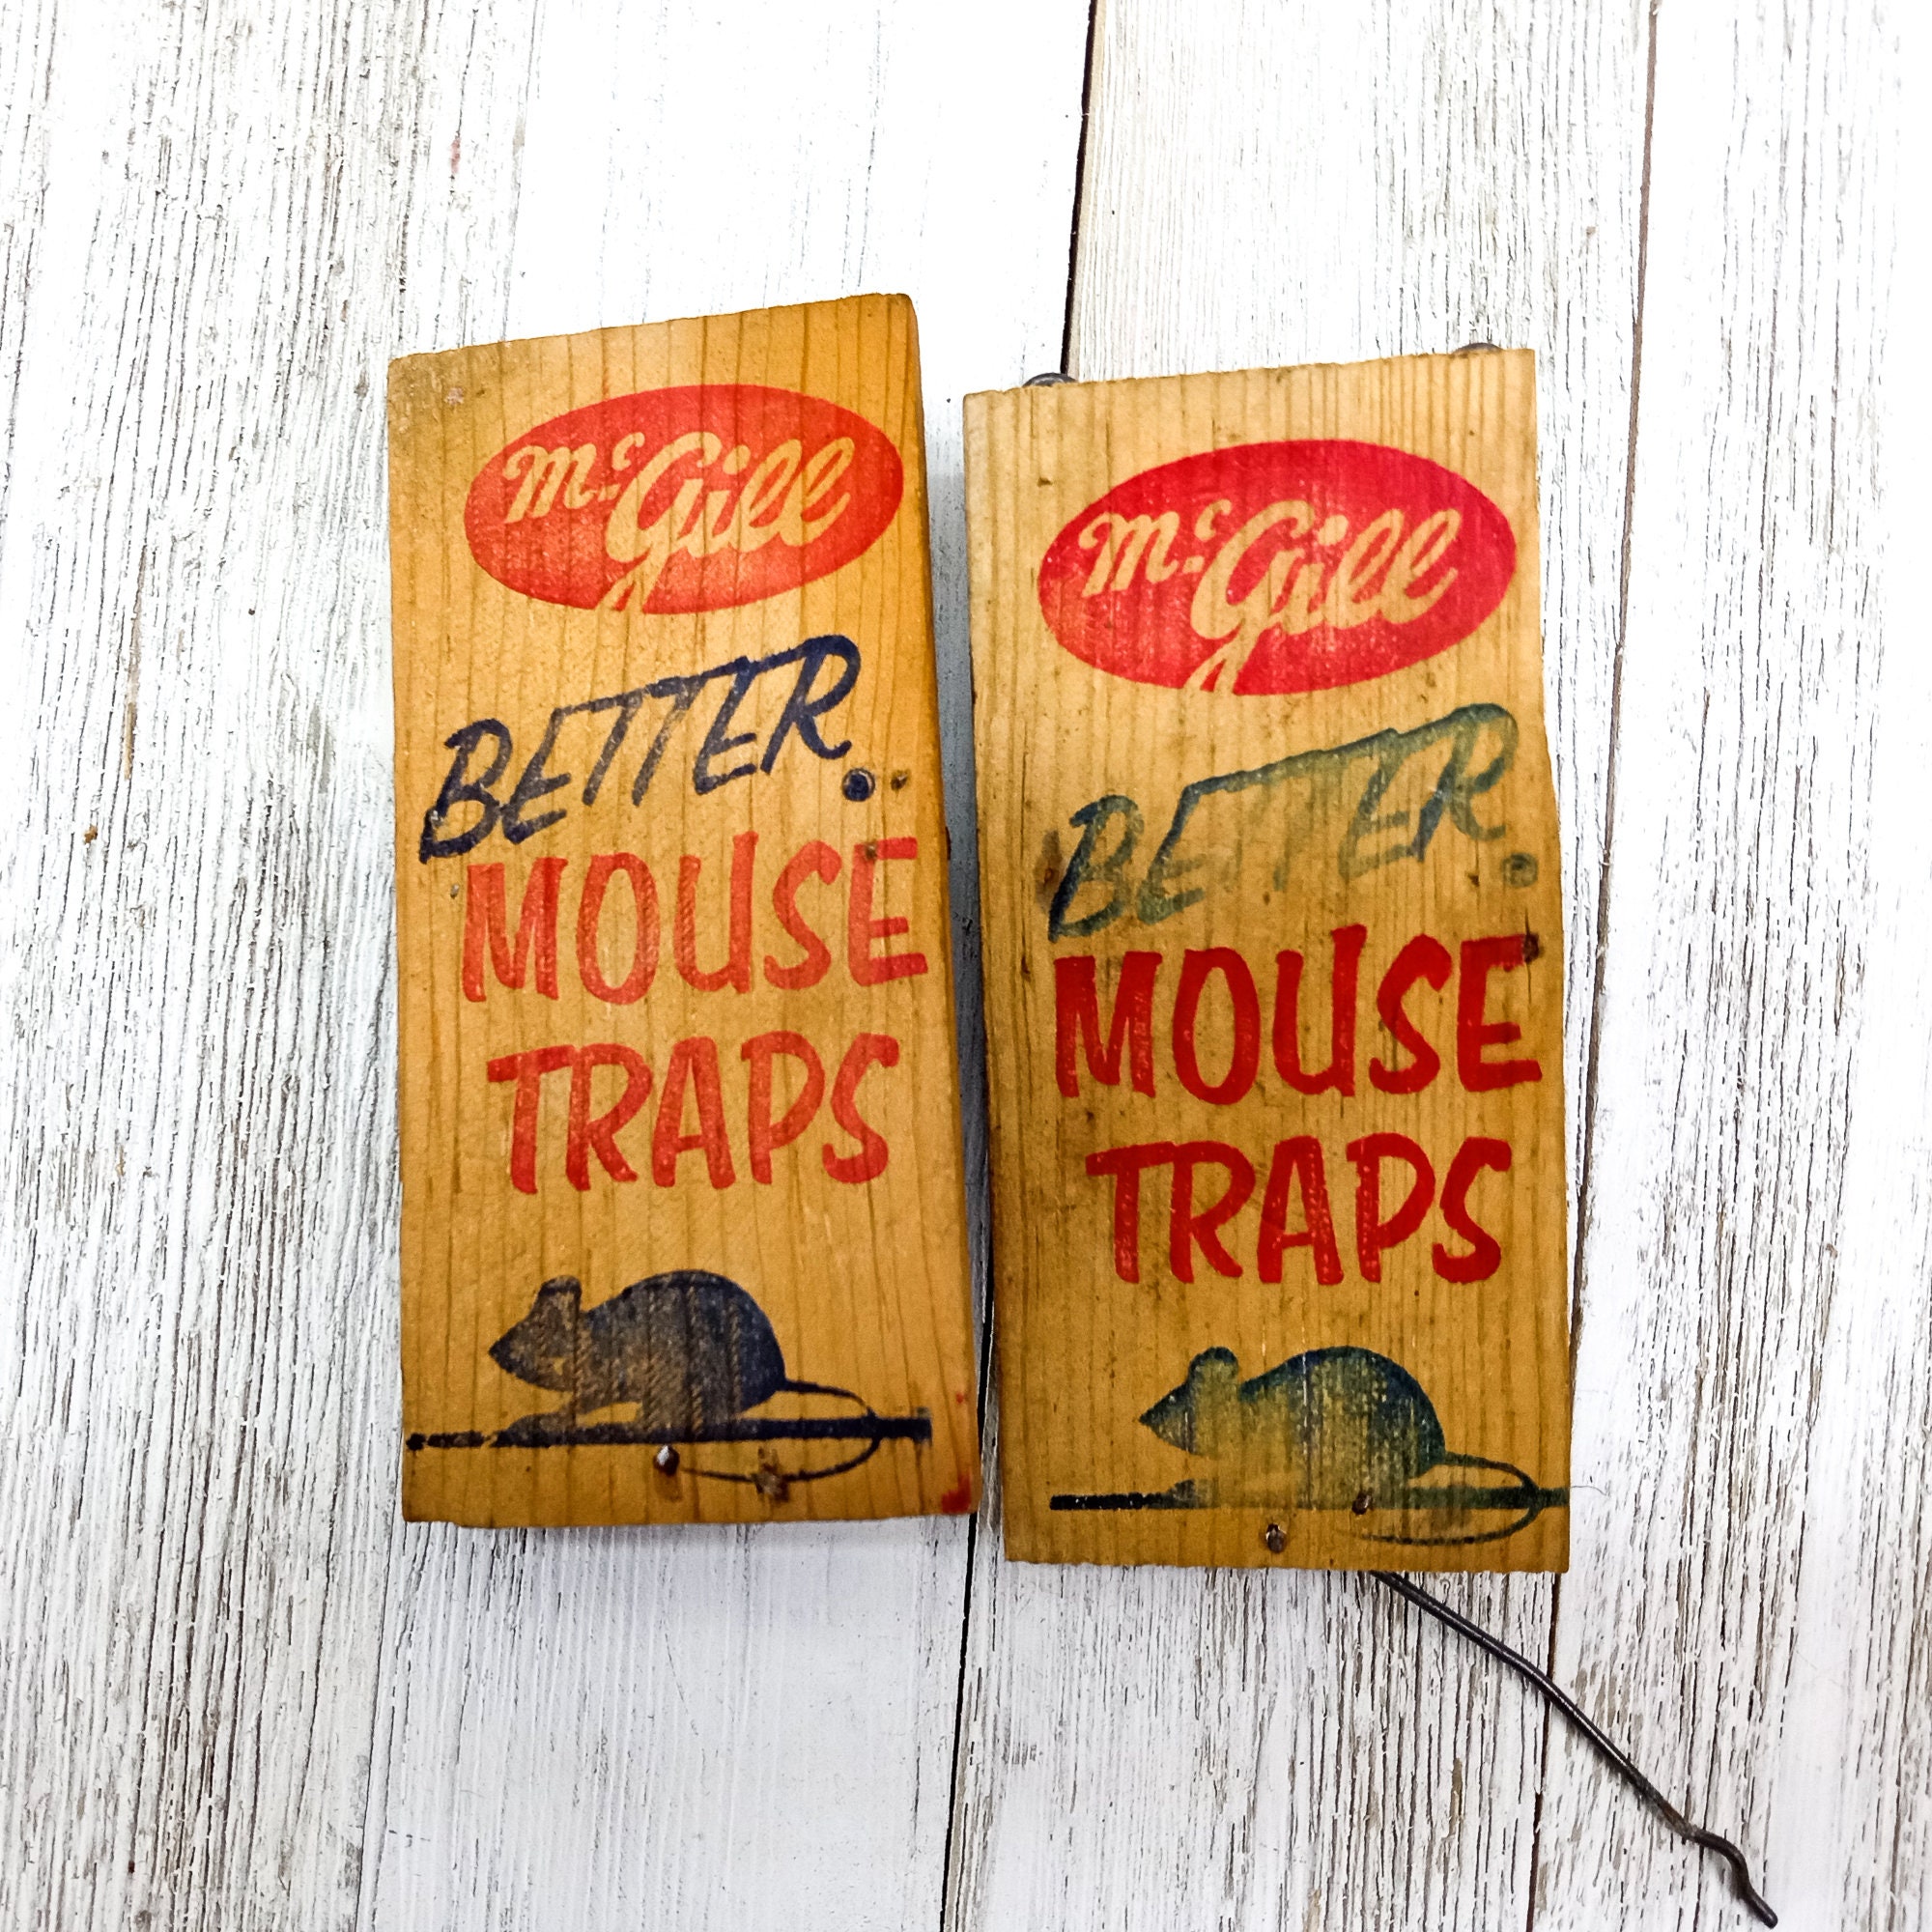 Vintage Mouse Trap Can't Miss Mcgill Better Mouse Traps 